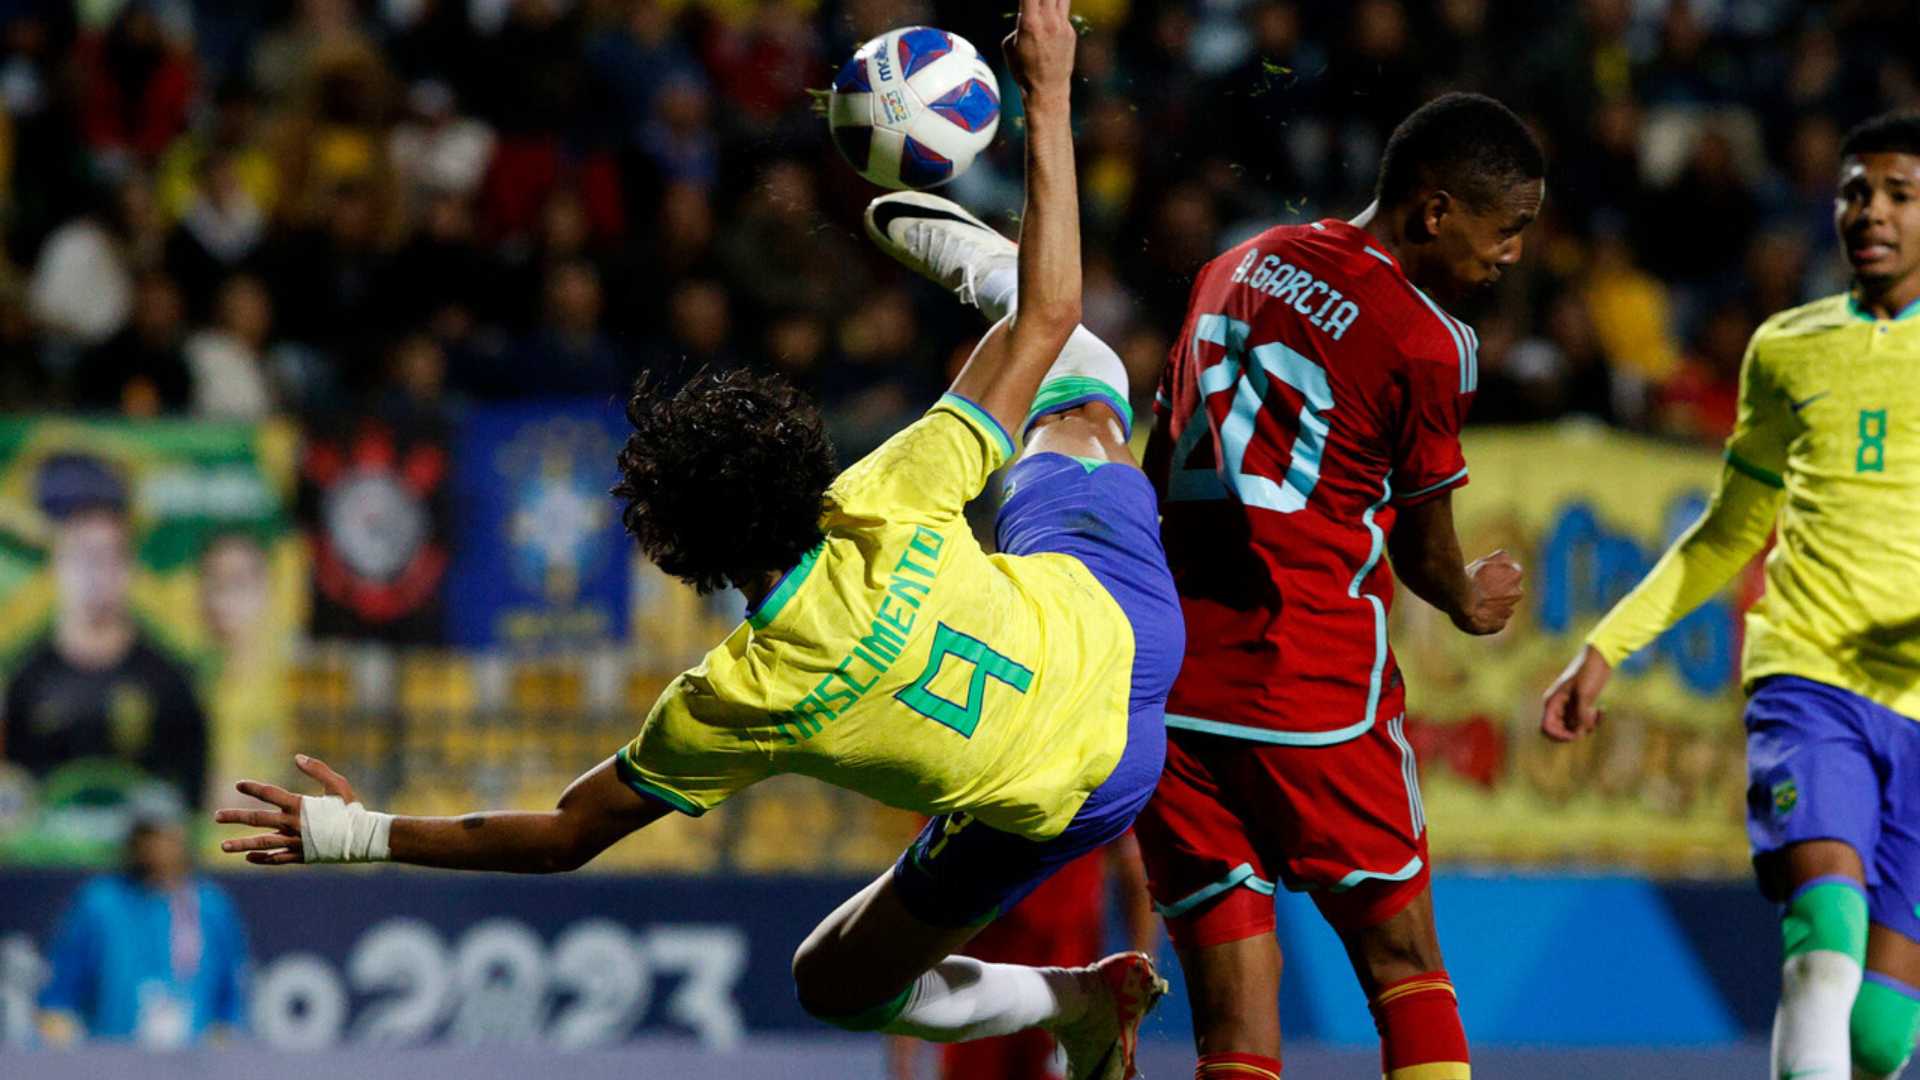 Brazil shows its credentials, is already in semifinals of male's football